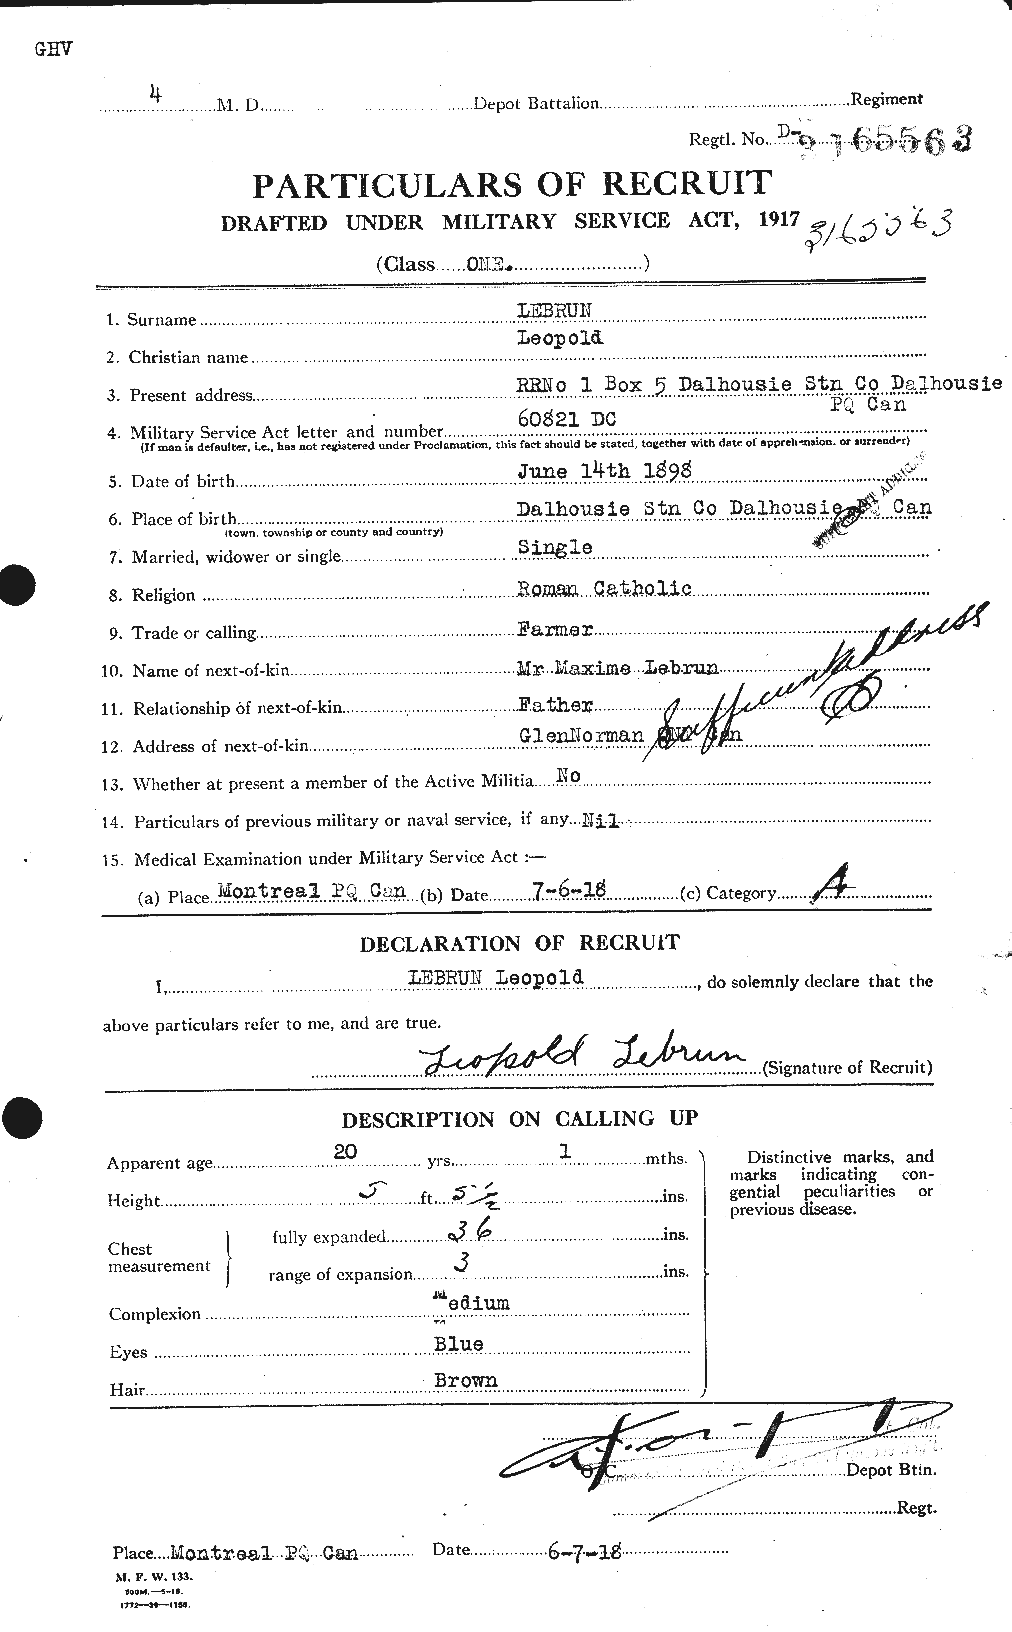 Personnel Records of the First World War - CEF 461579a